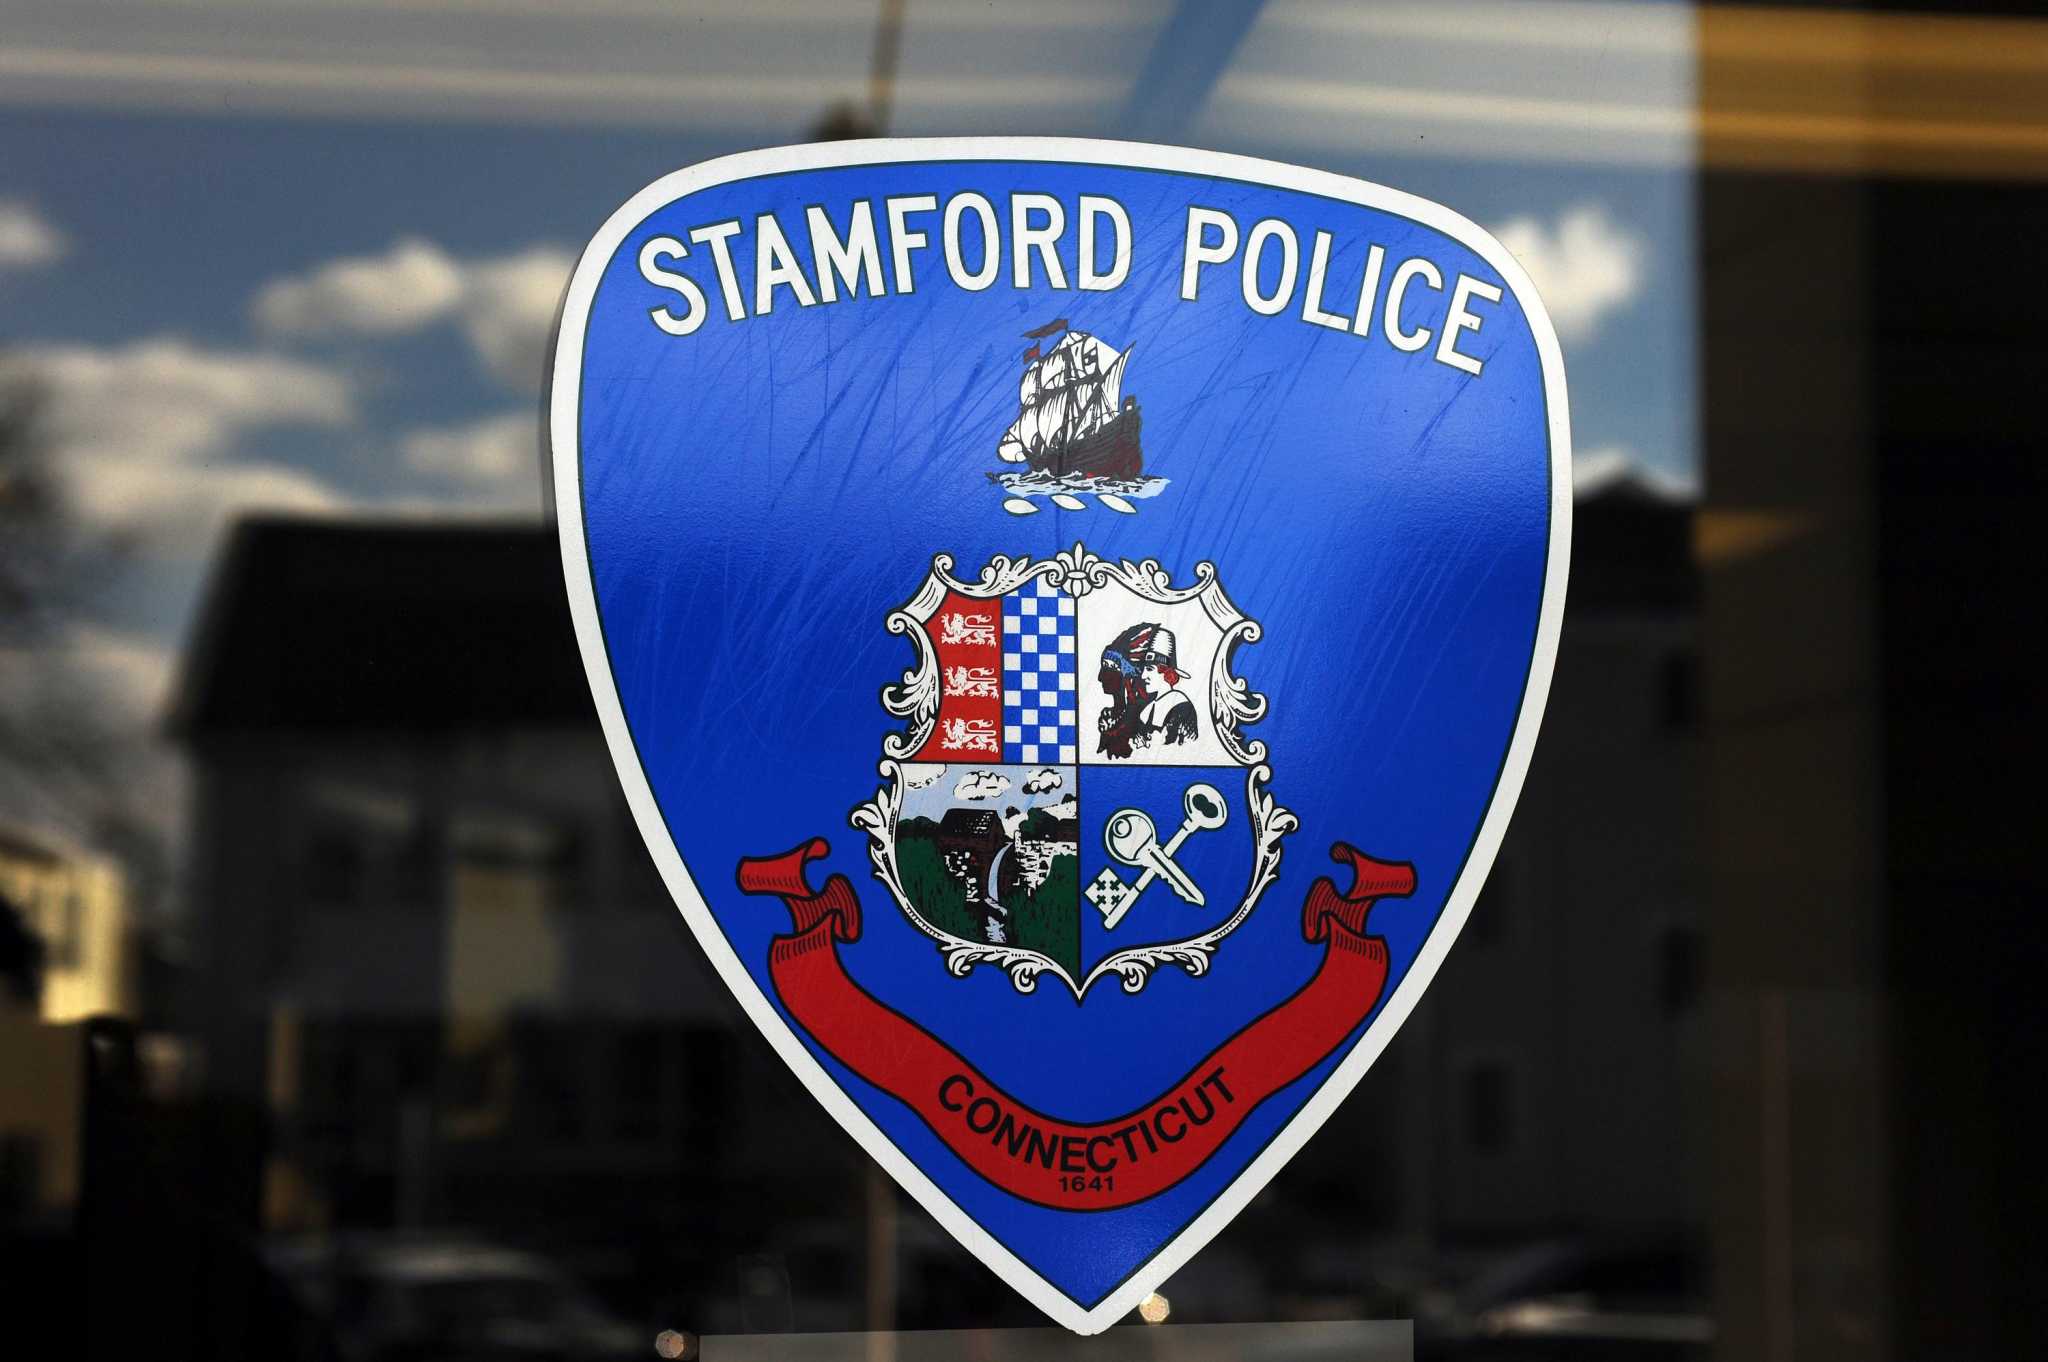 Stamford 14 Year Old Charged With Murder Was Suspect In Shooting A Week Earlier Court Docs Show